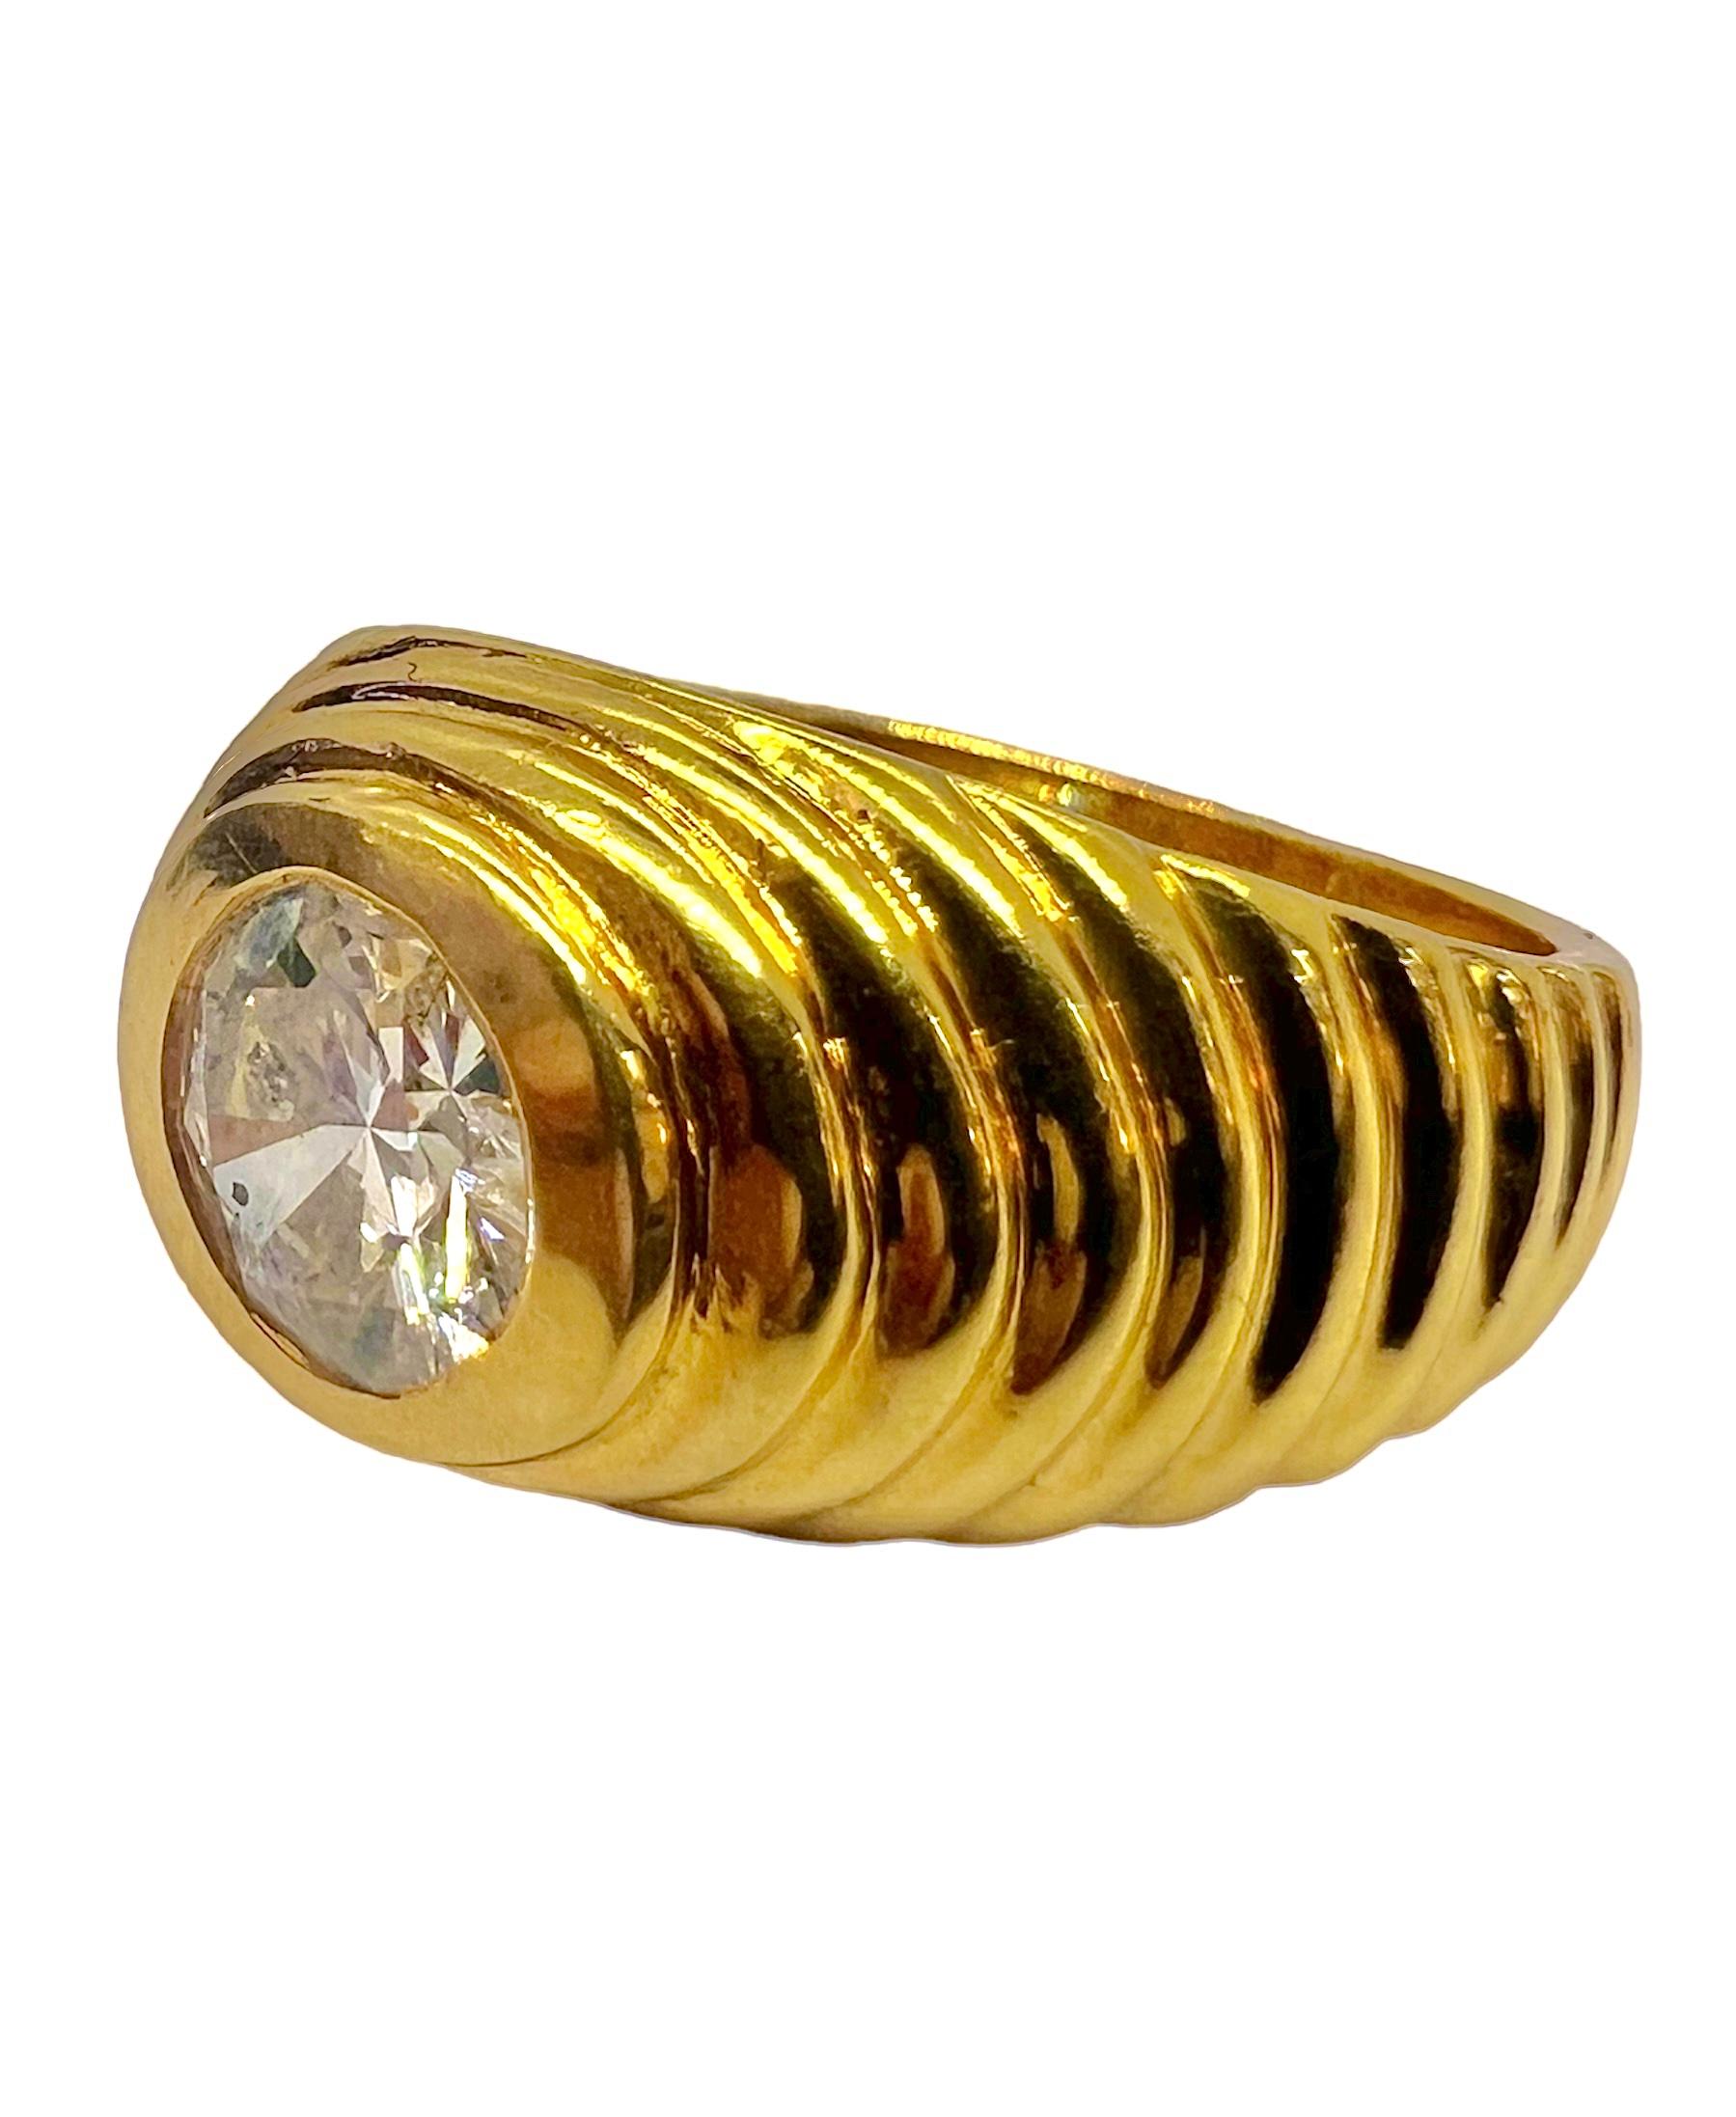 18K yellow gold ring with 1.03 carat center round diamond. 

Sophia D by Joseph Dardashti LTD has been known worldwide for 35 years and are inspired by classic Art Deco design that merges with modern manufacturing techniques. 